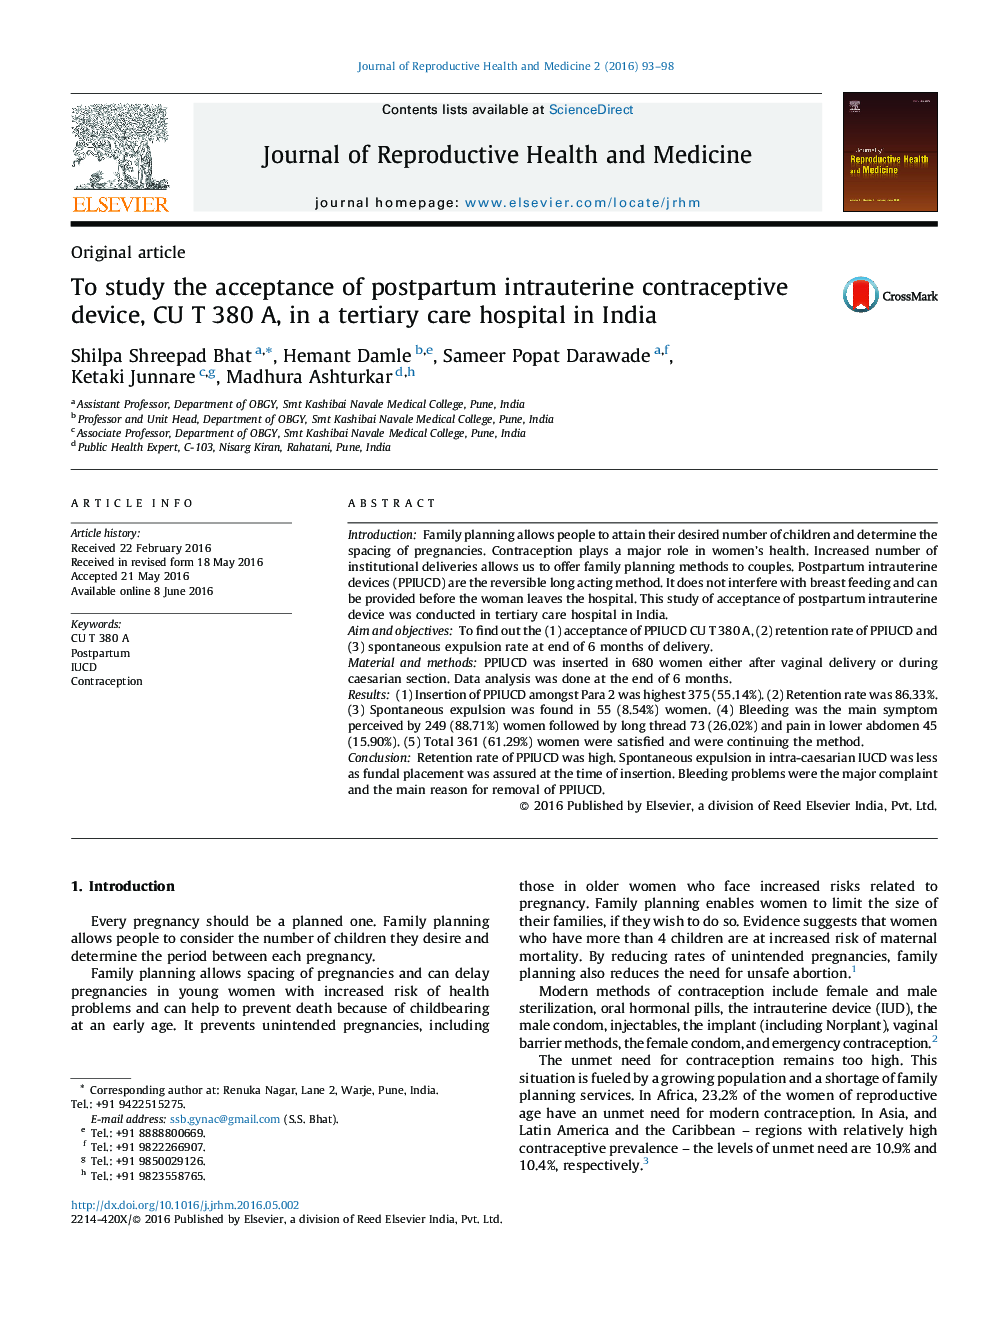 To study the acceptance of postpartum intrauterine contraceptive device, CU T 380 A, in a tertiary care hospital in India